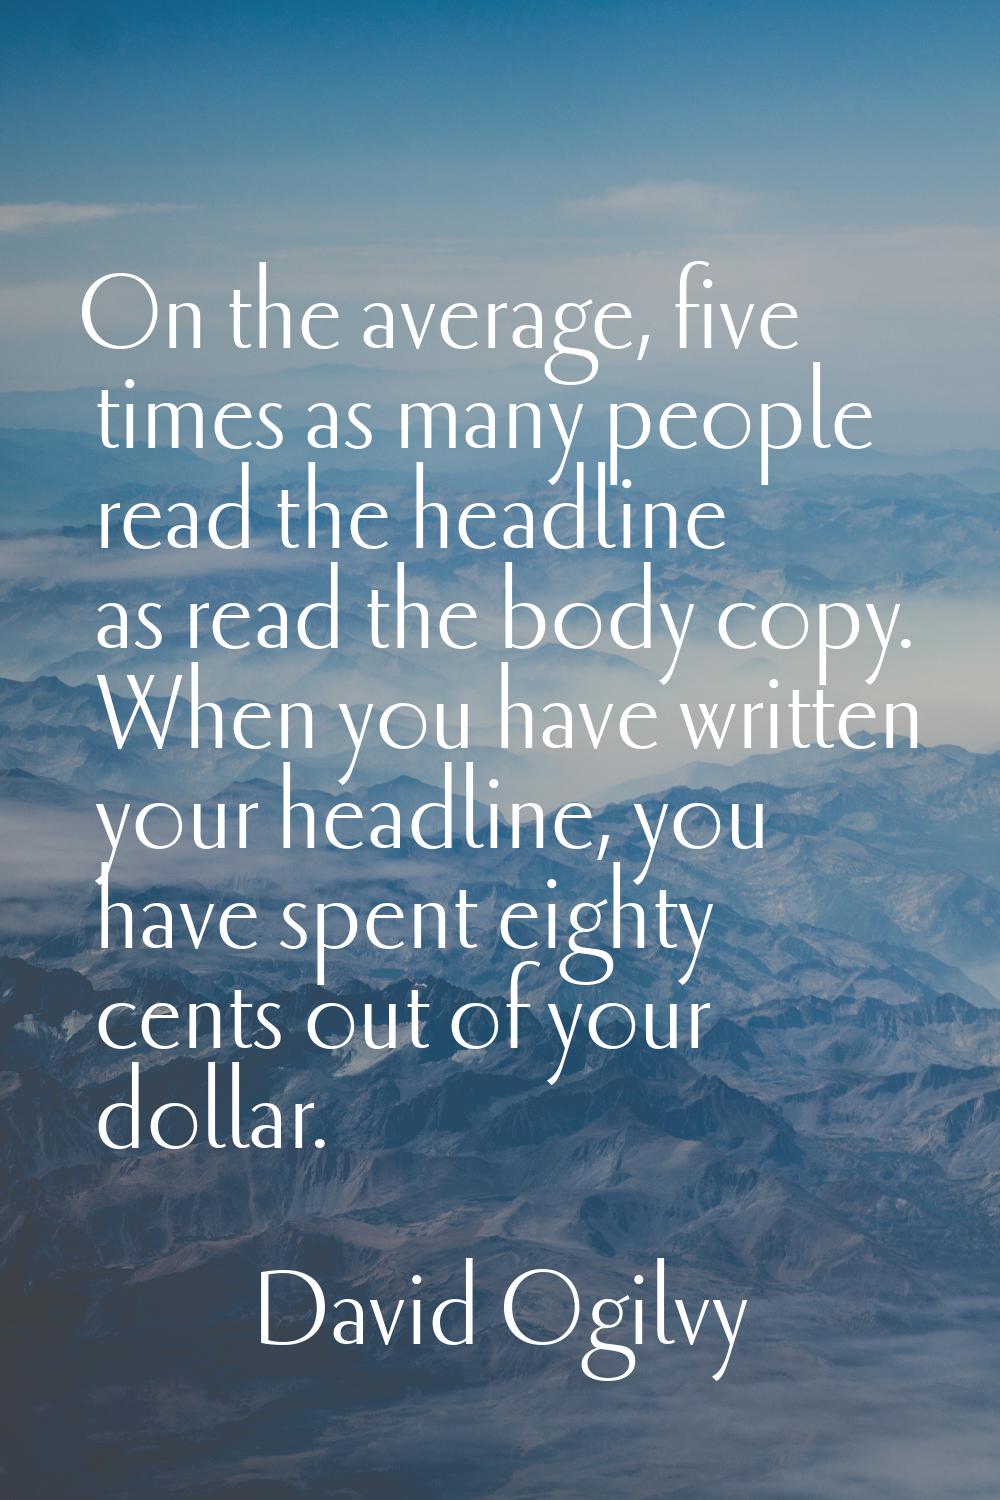 On the average, five times as many people read the headline as read the body copy. When you have wr